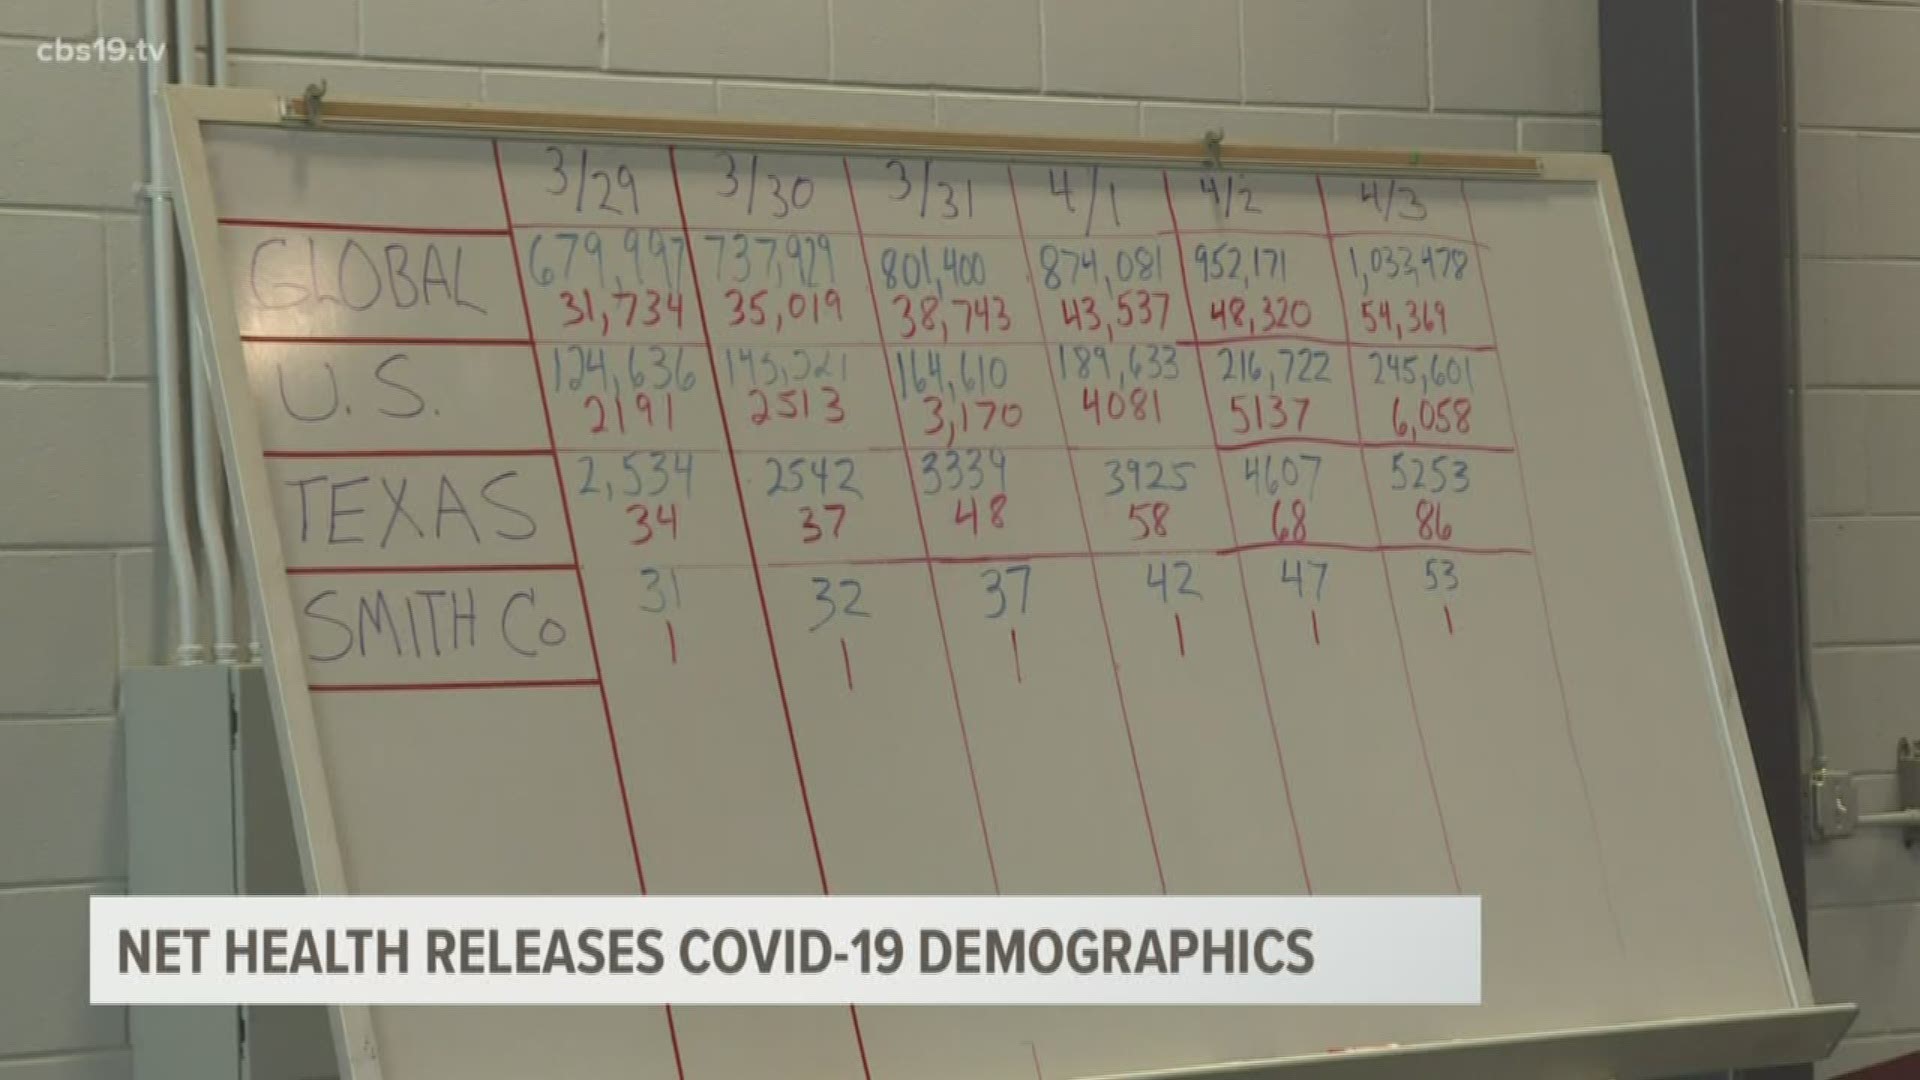 NET Health broke down some of the demographics of COVID-19 in Smith County.